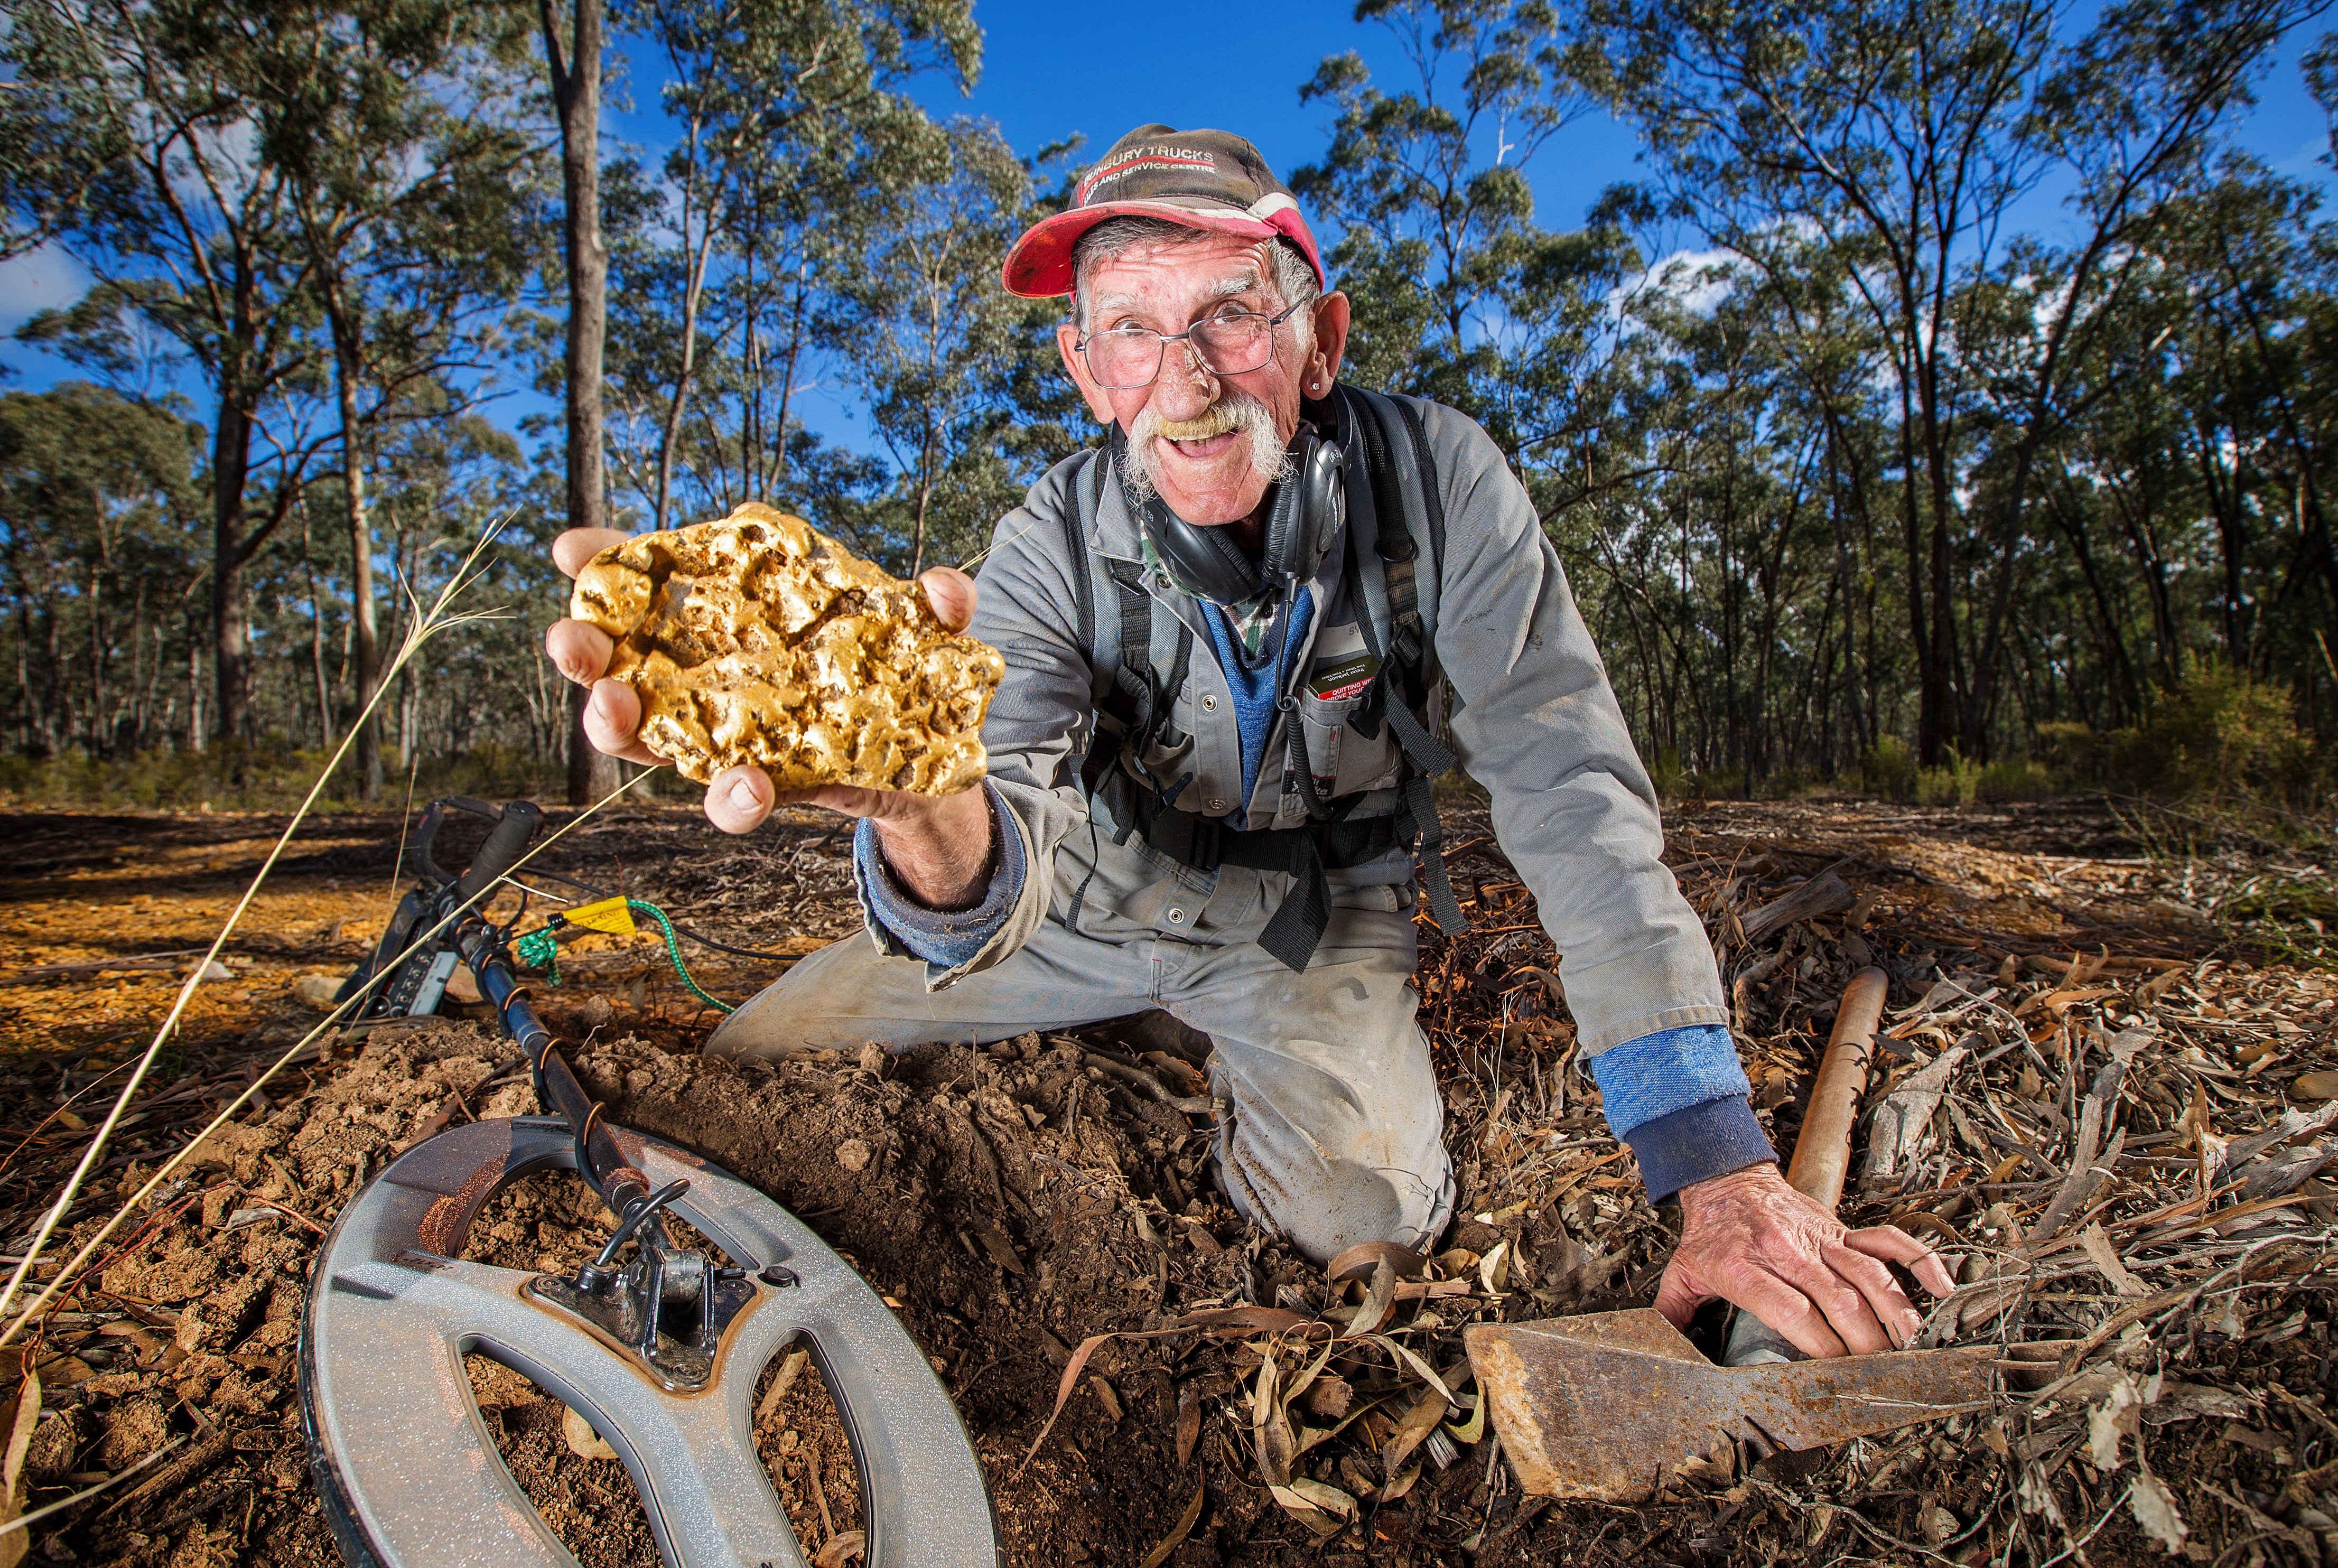 Syd Pearson, who prospects for a hobby, has found what is believed to be one of the largest gold nuggets ever discovered